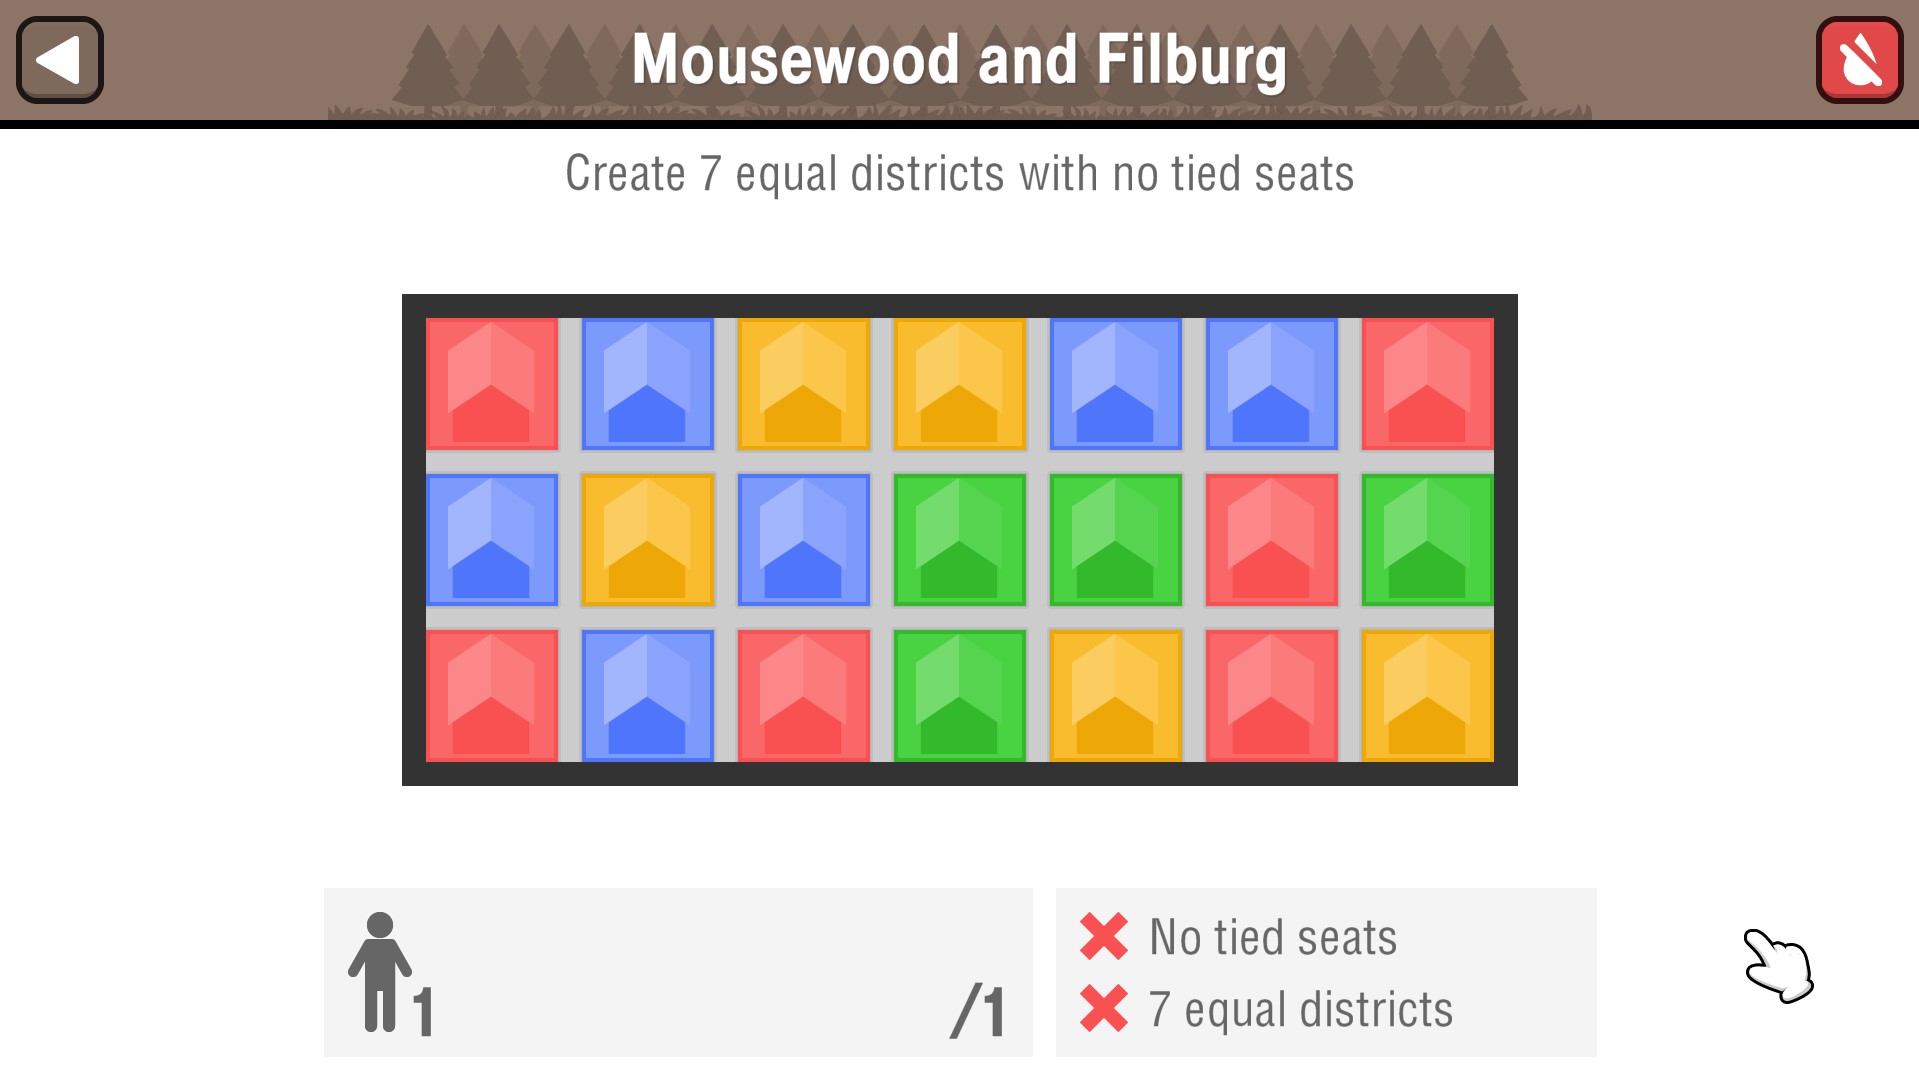 Mousewood and Filburg